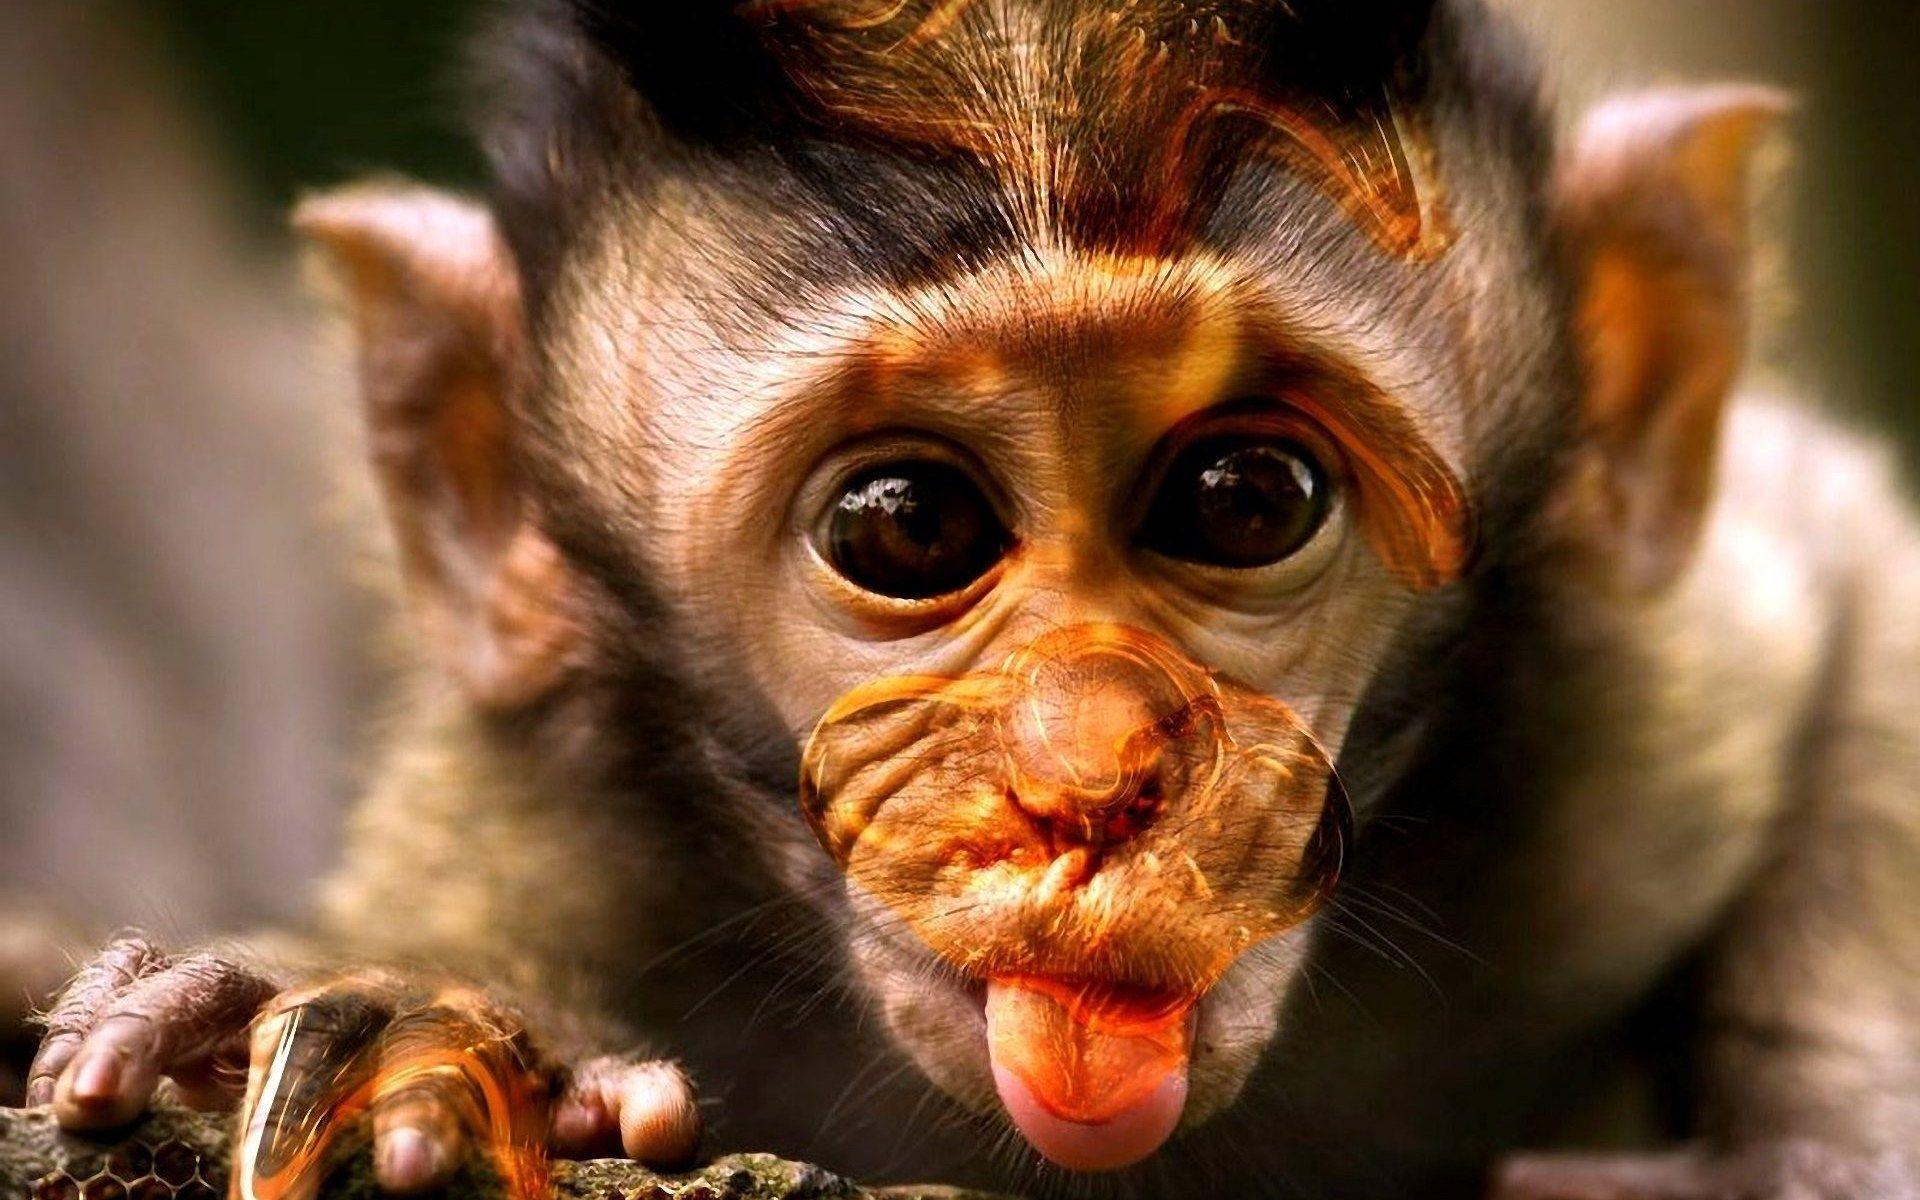 Funny Monkey Wallpaper. Funny Monkey Picture